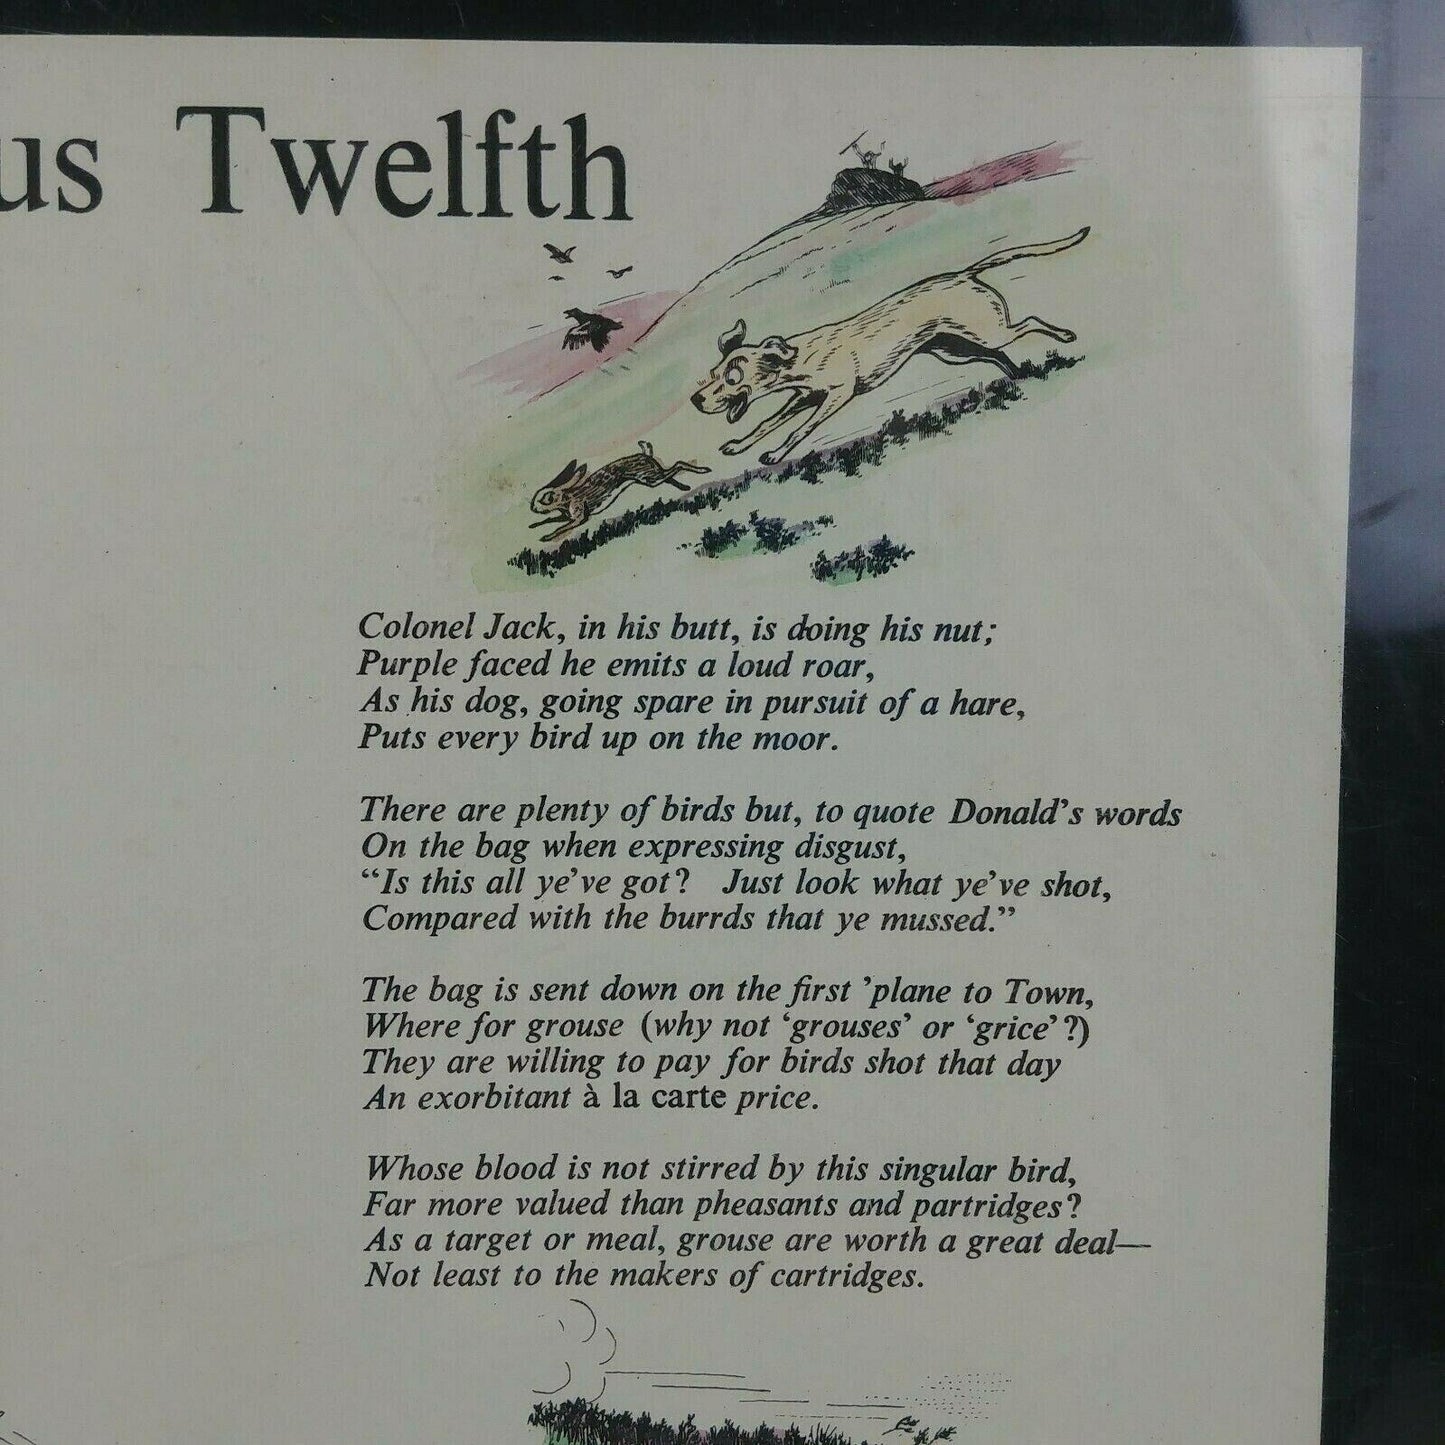 The Furious Twelfth Framed Poem by Christopher Curtis Illus. by John Tickner